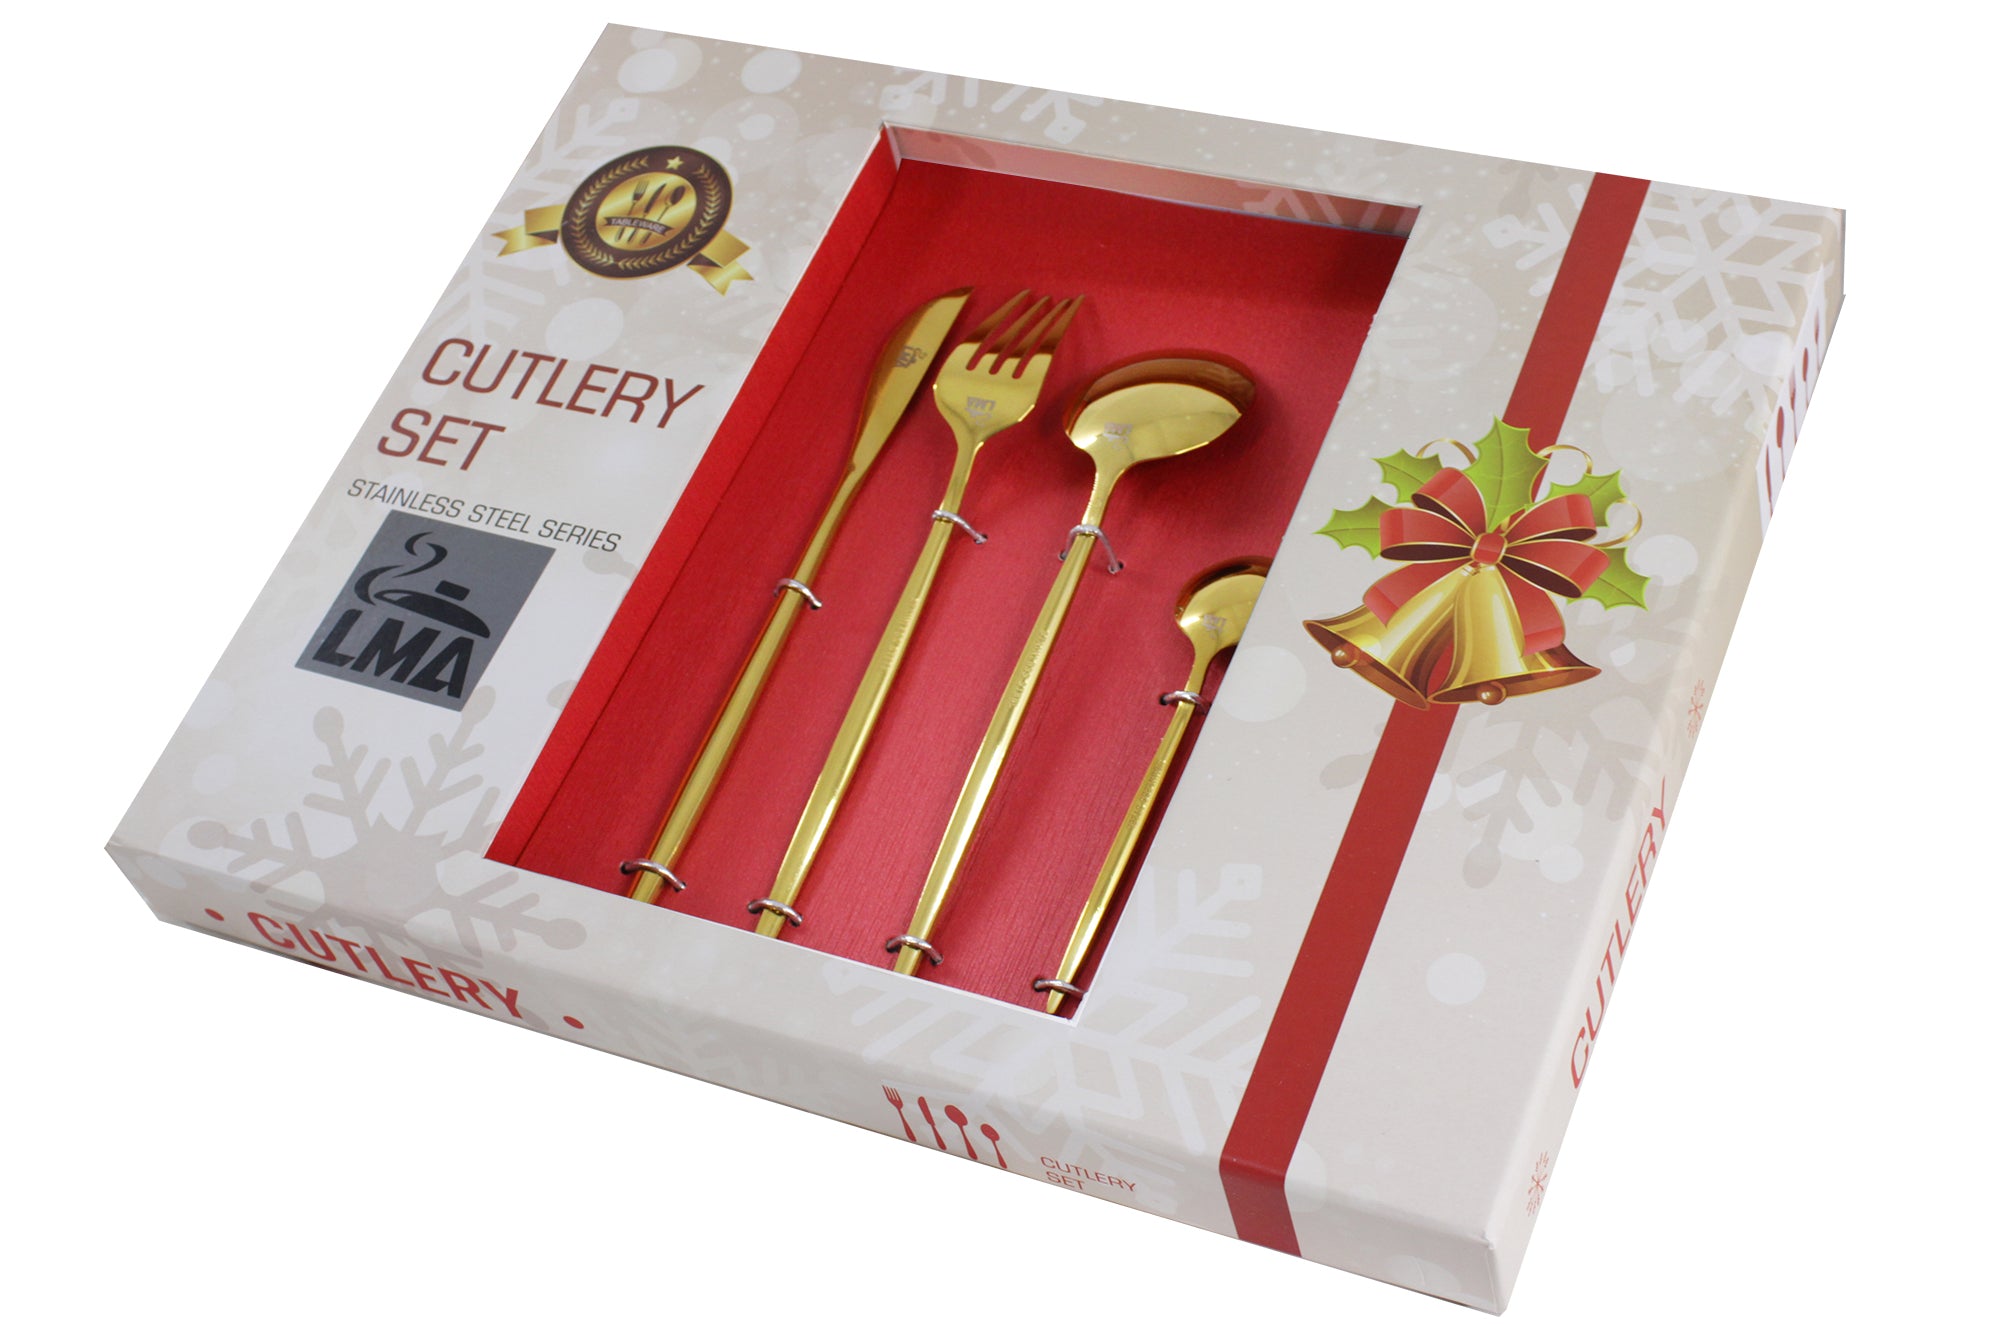 LMA 24 Piece Stainless Steel Flatware Set in Christmas Gift Box